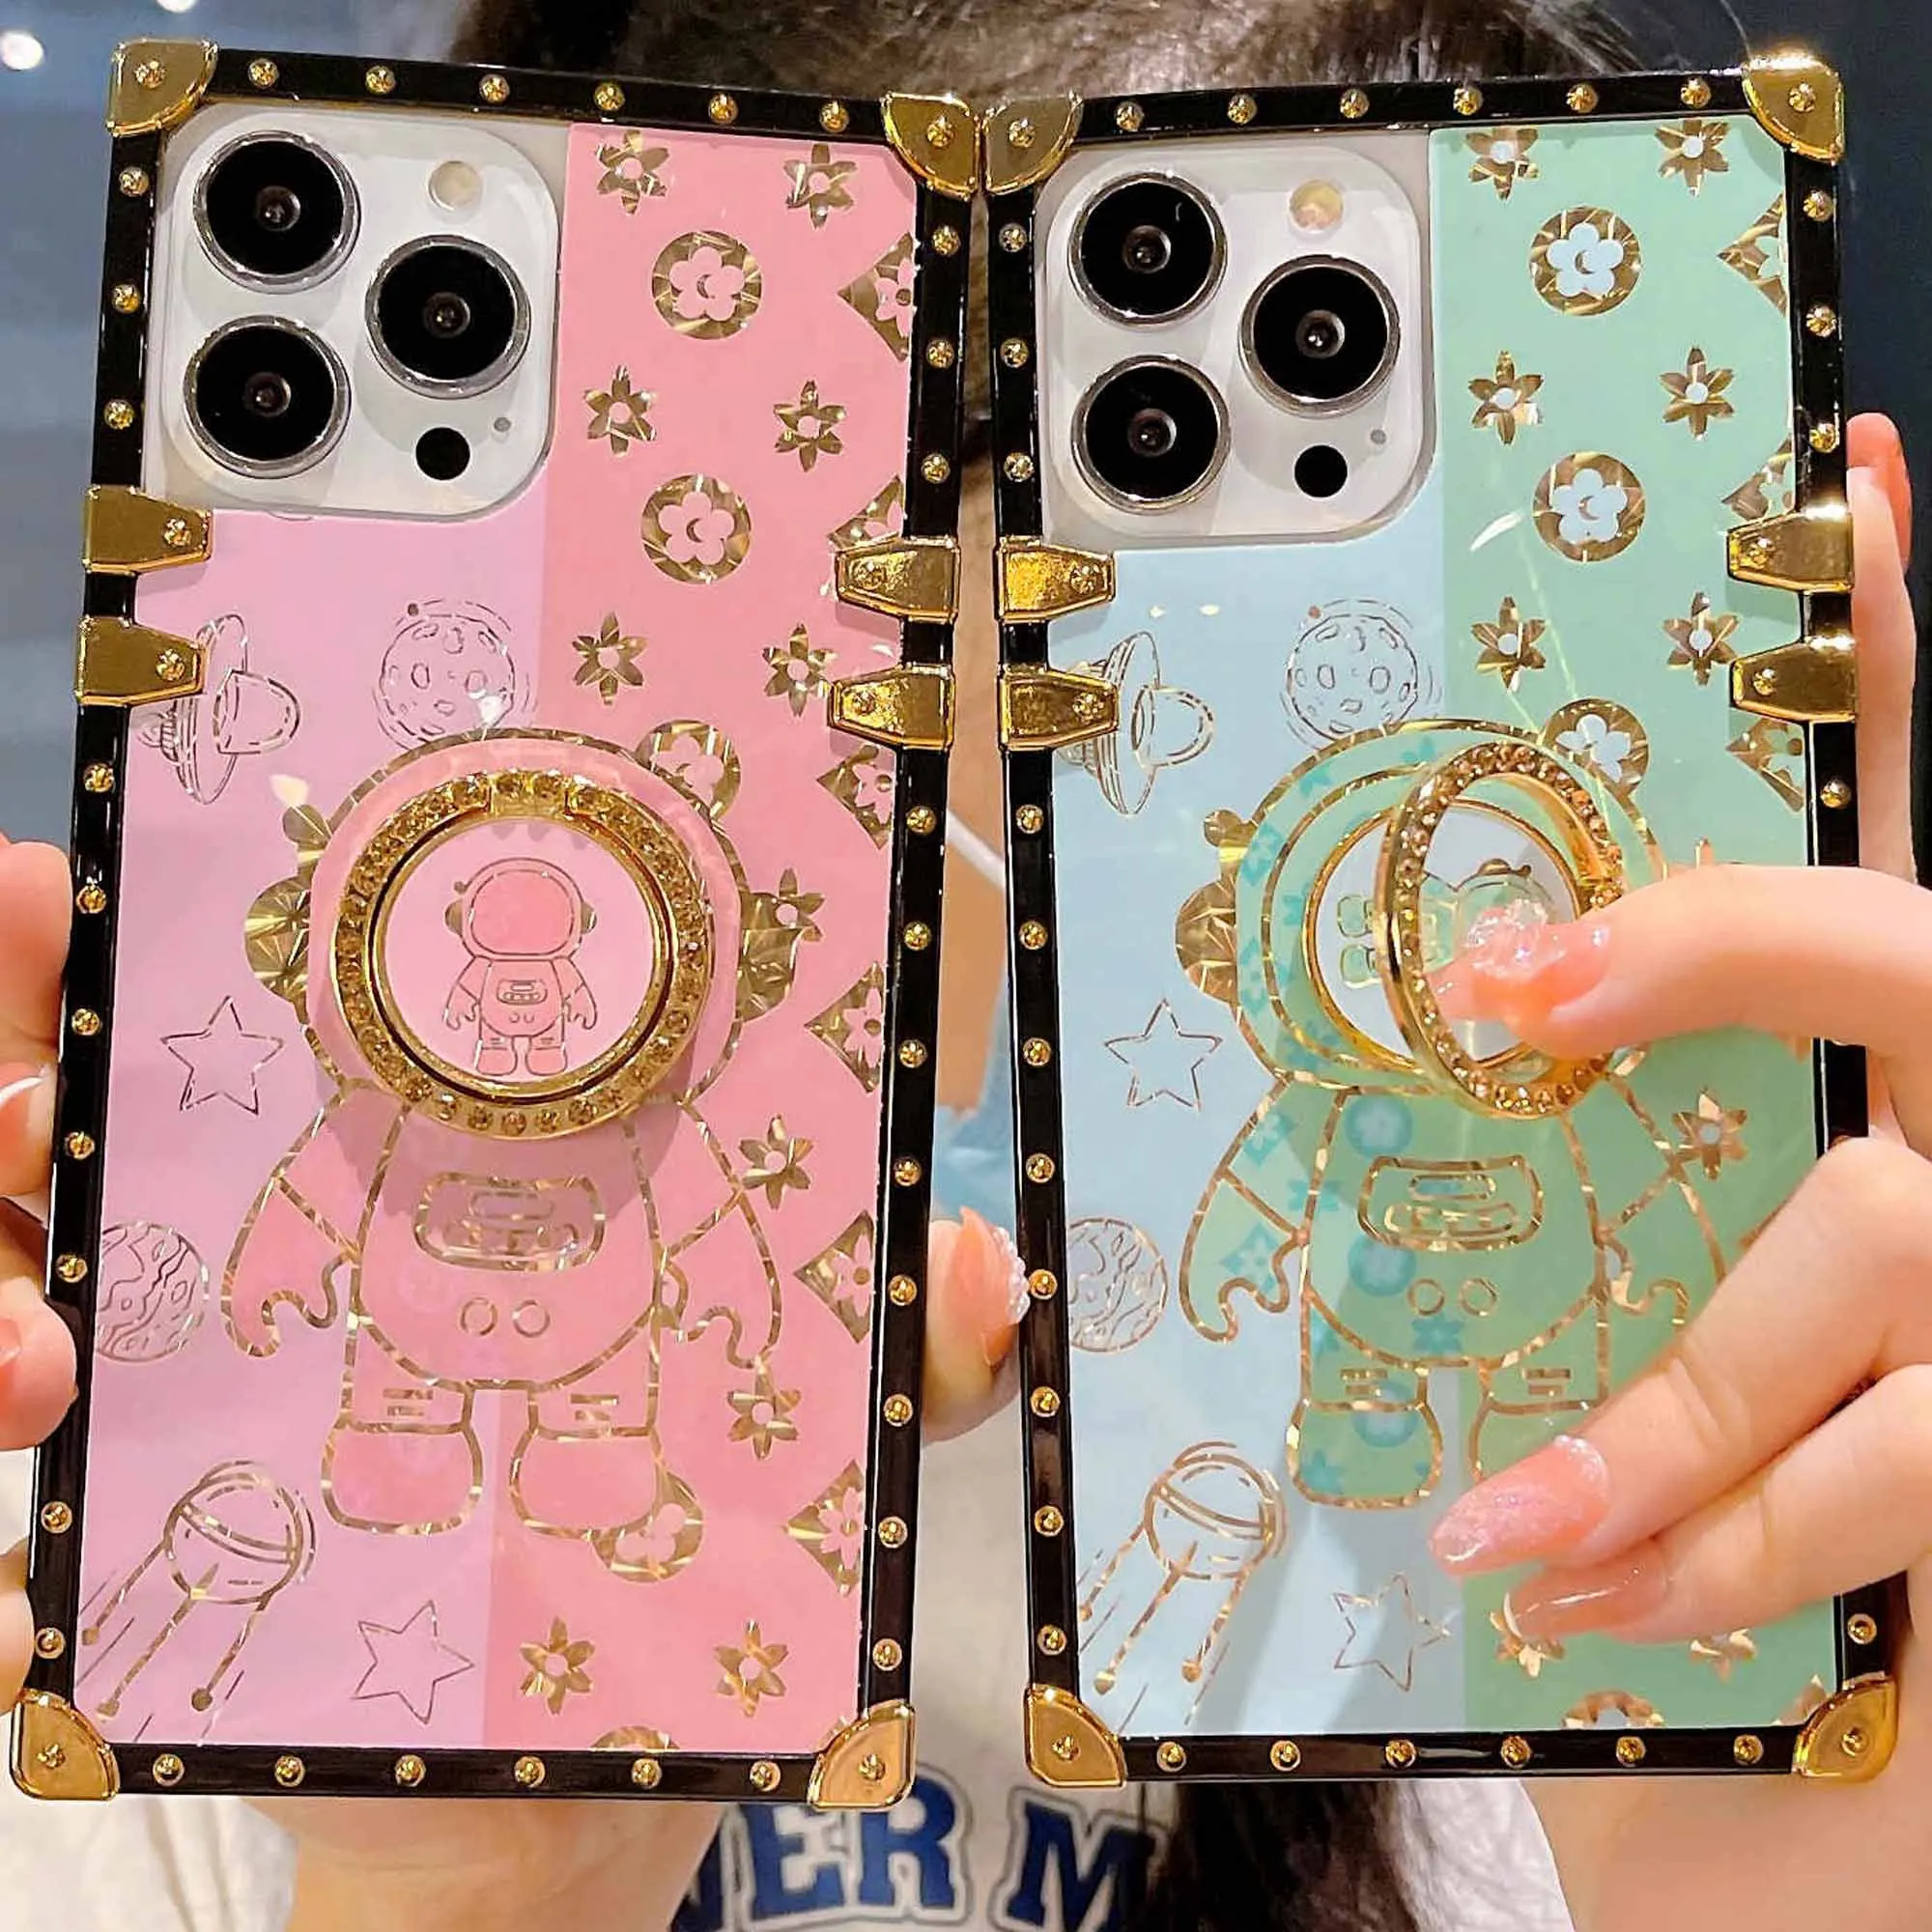 Musubo Luxury Flower Leather Phone Case For Samsung Galaxy S22 S23 Ultra  S21 S20FE A13 A14 A53 A51 A52S Cover Girls Soft Square - AliExpress